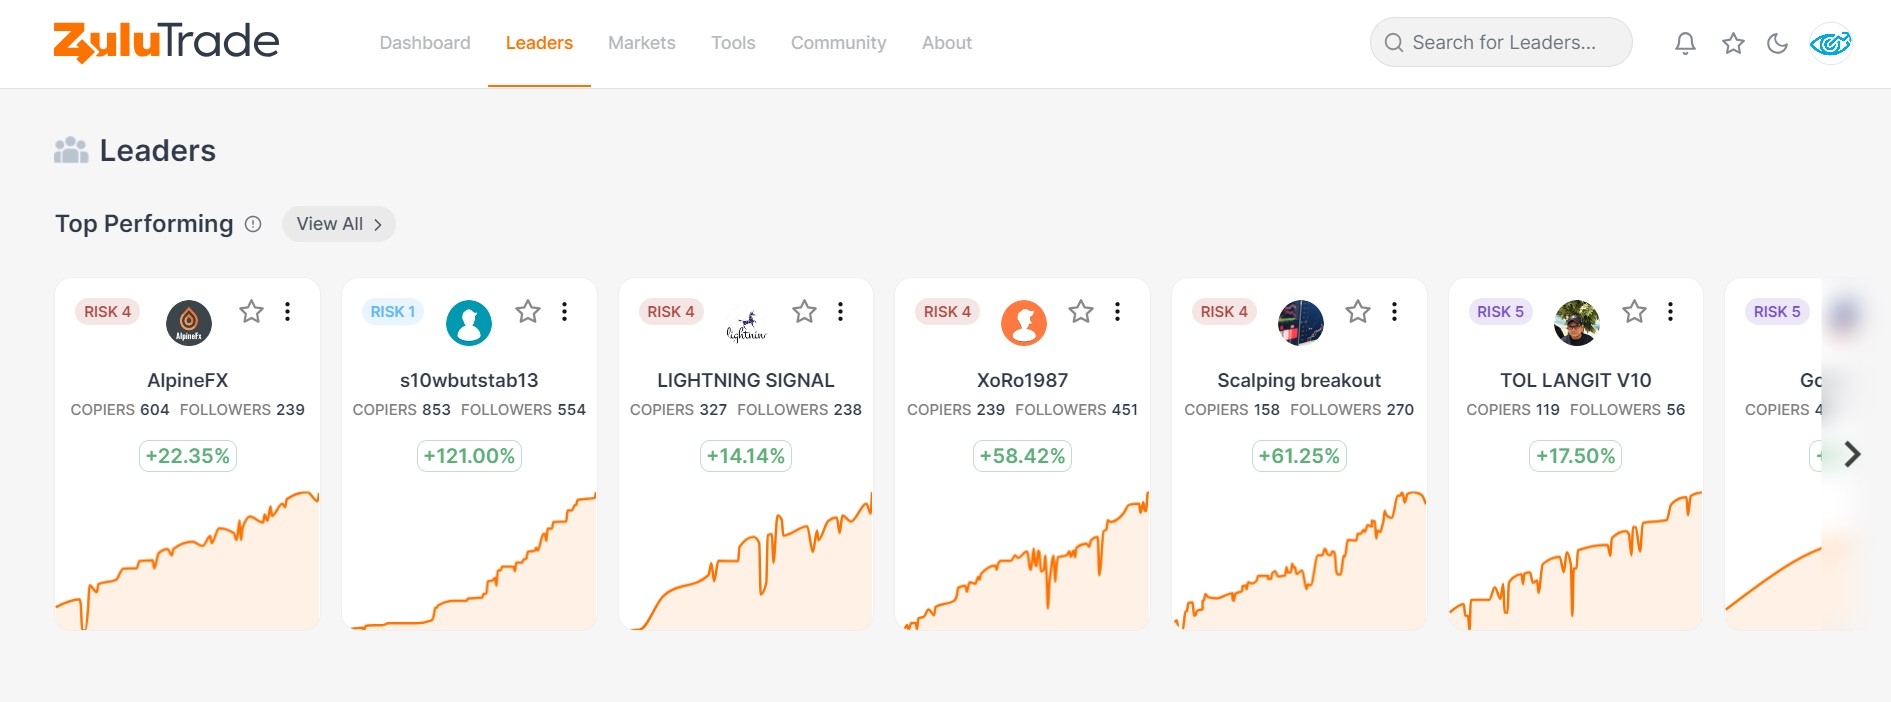 Top traders on ZuluTrade